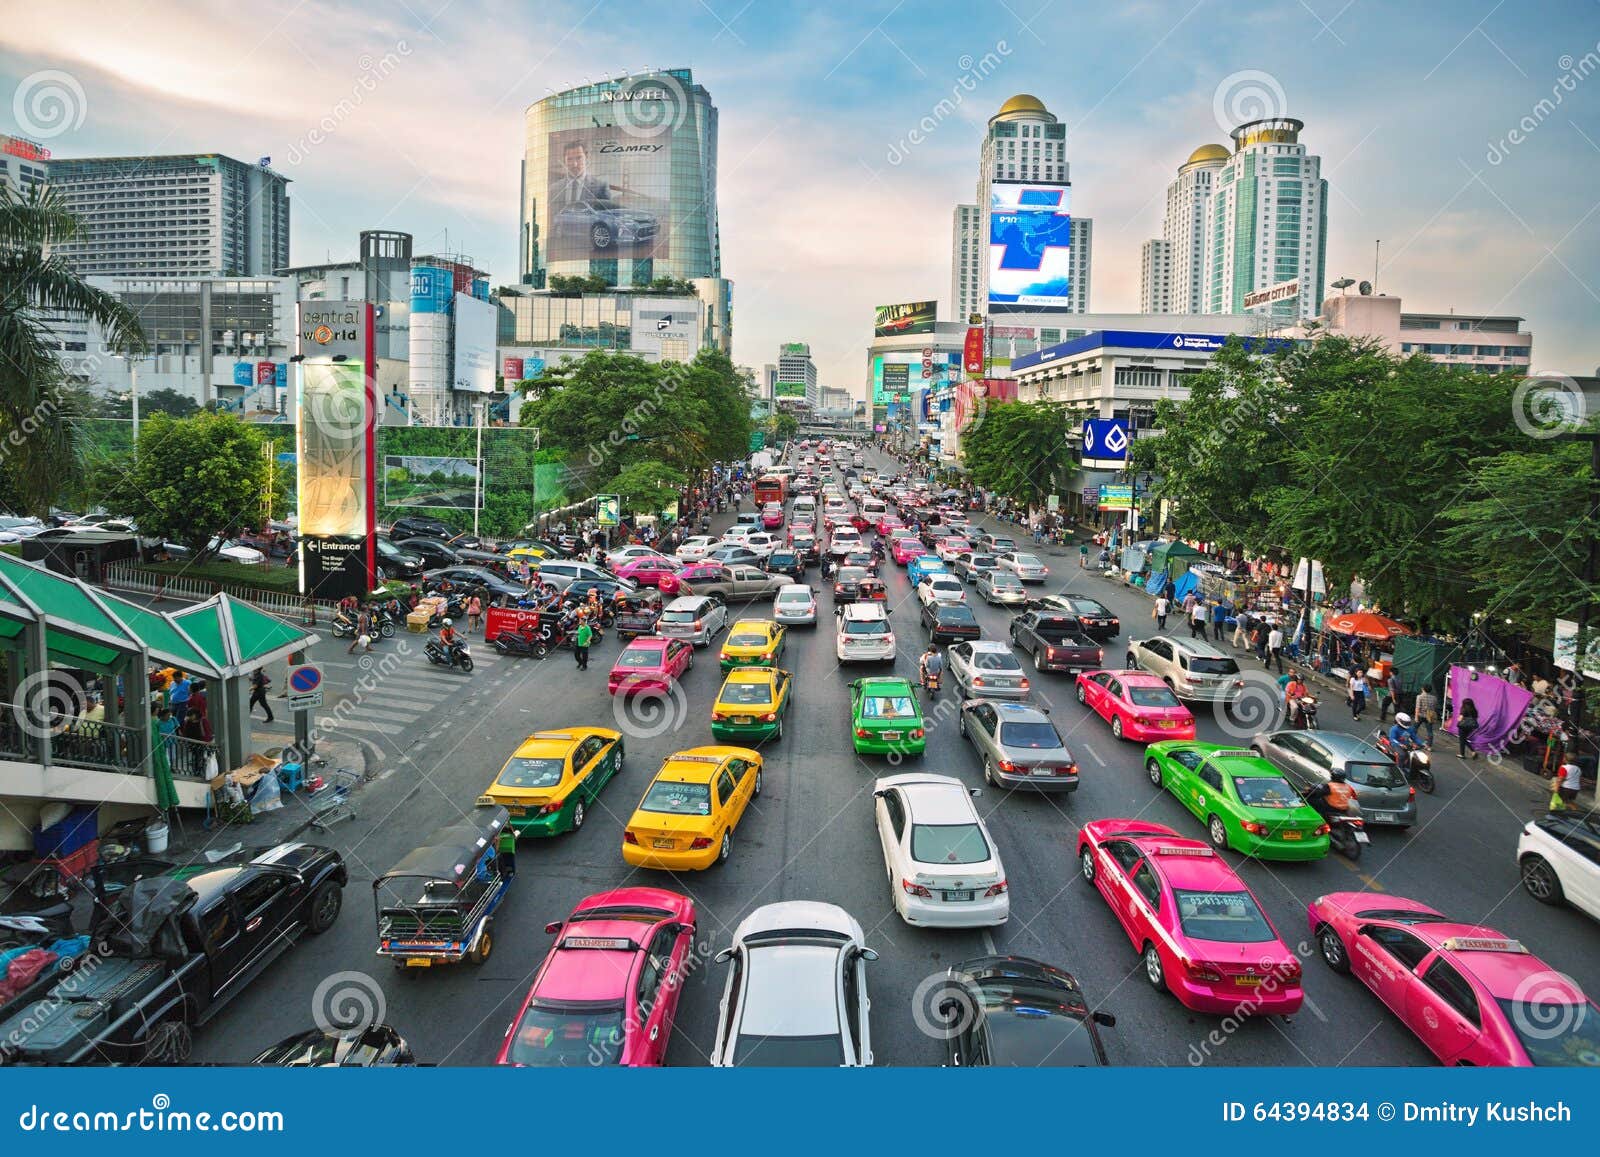 10 Things You Should Know When Taking a Taxi in Bangkok - Good Things ...